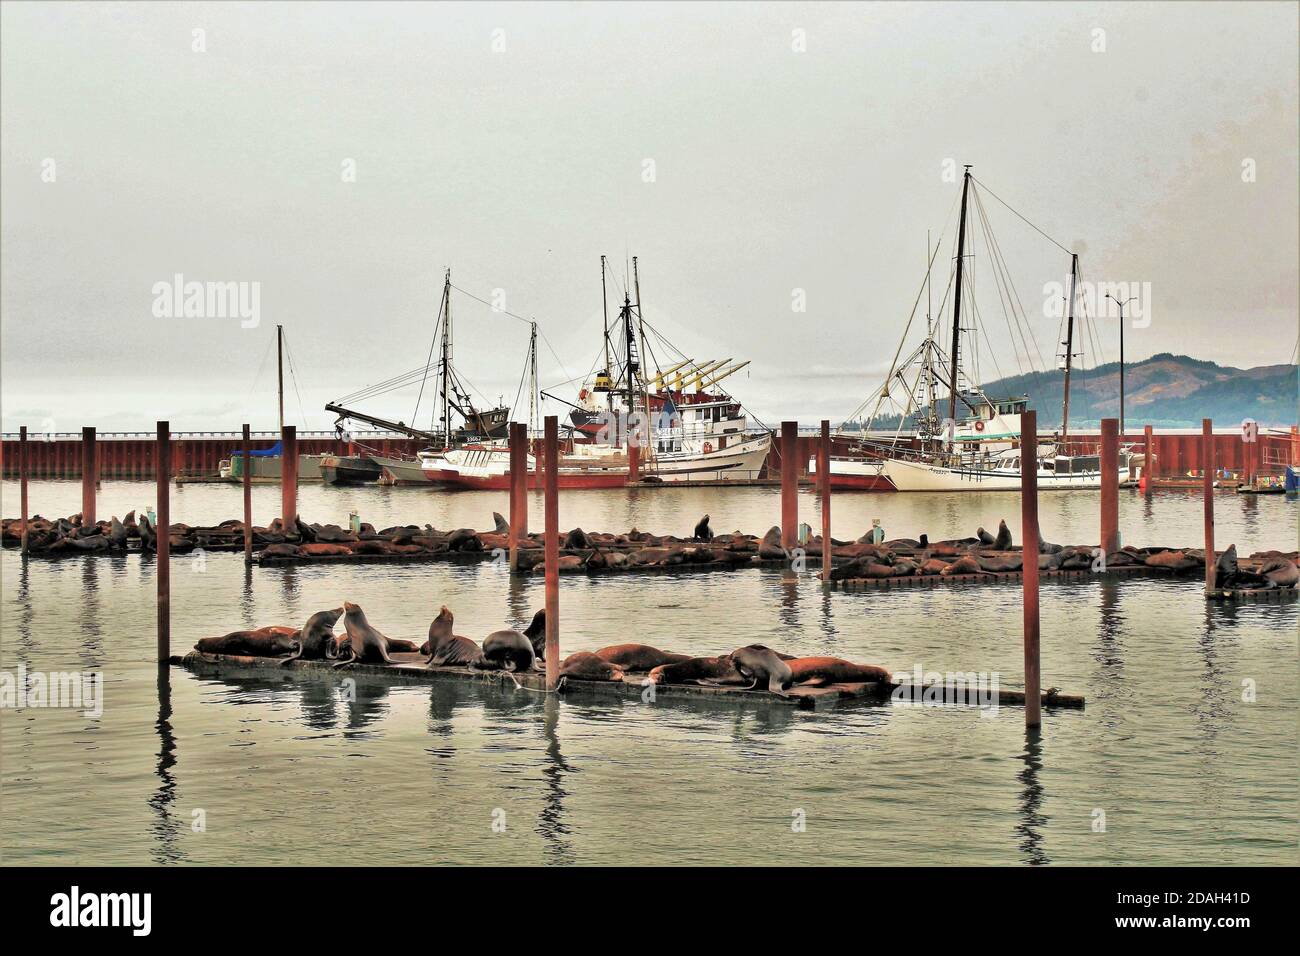 Astoria, Oregon, 9/16/17, Fishing boat docked and sea lions resting on the docks in Astoria, Oregon Stock Photo